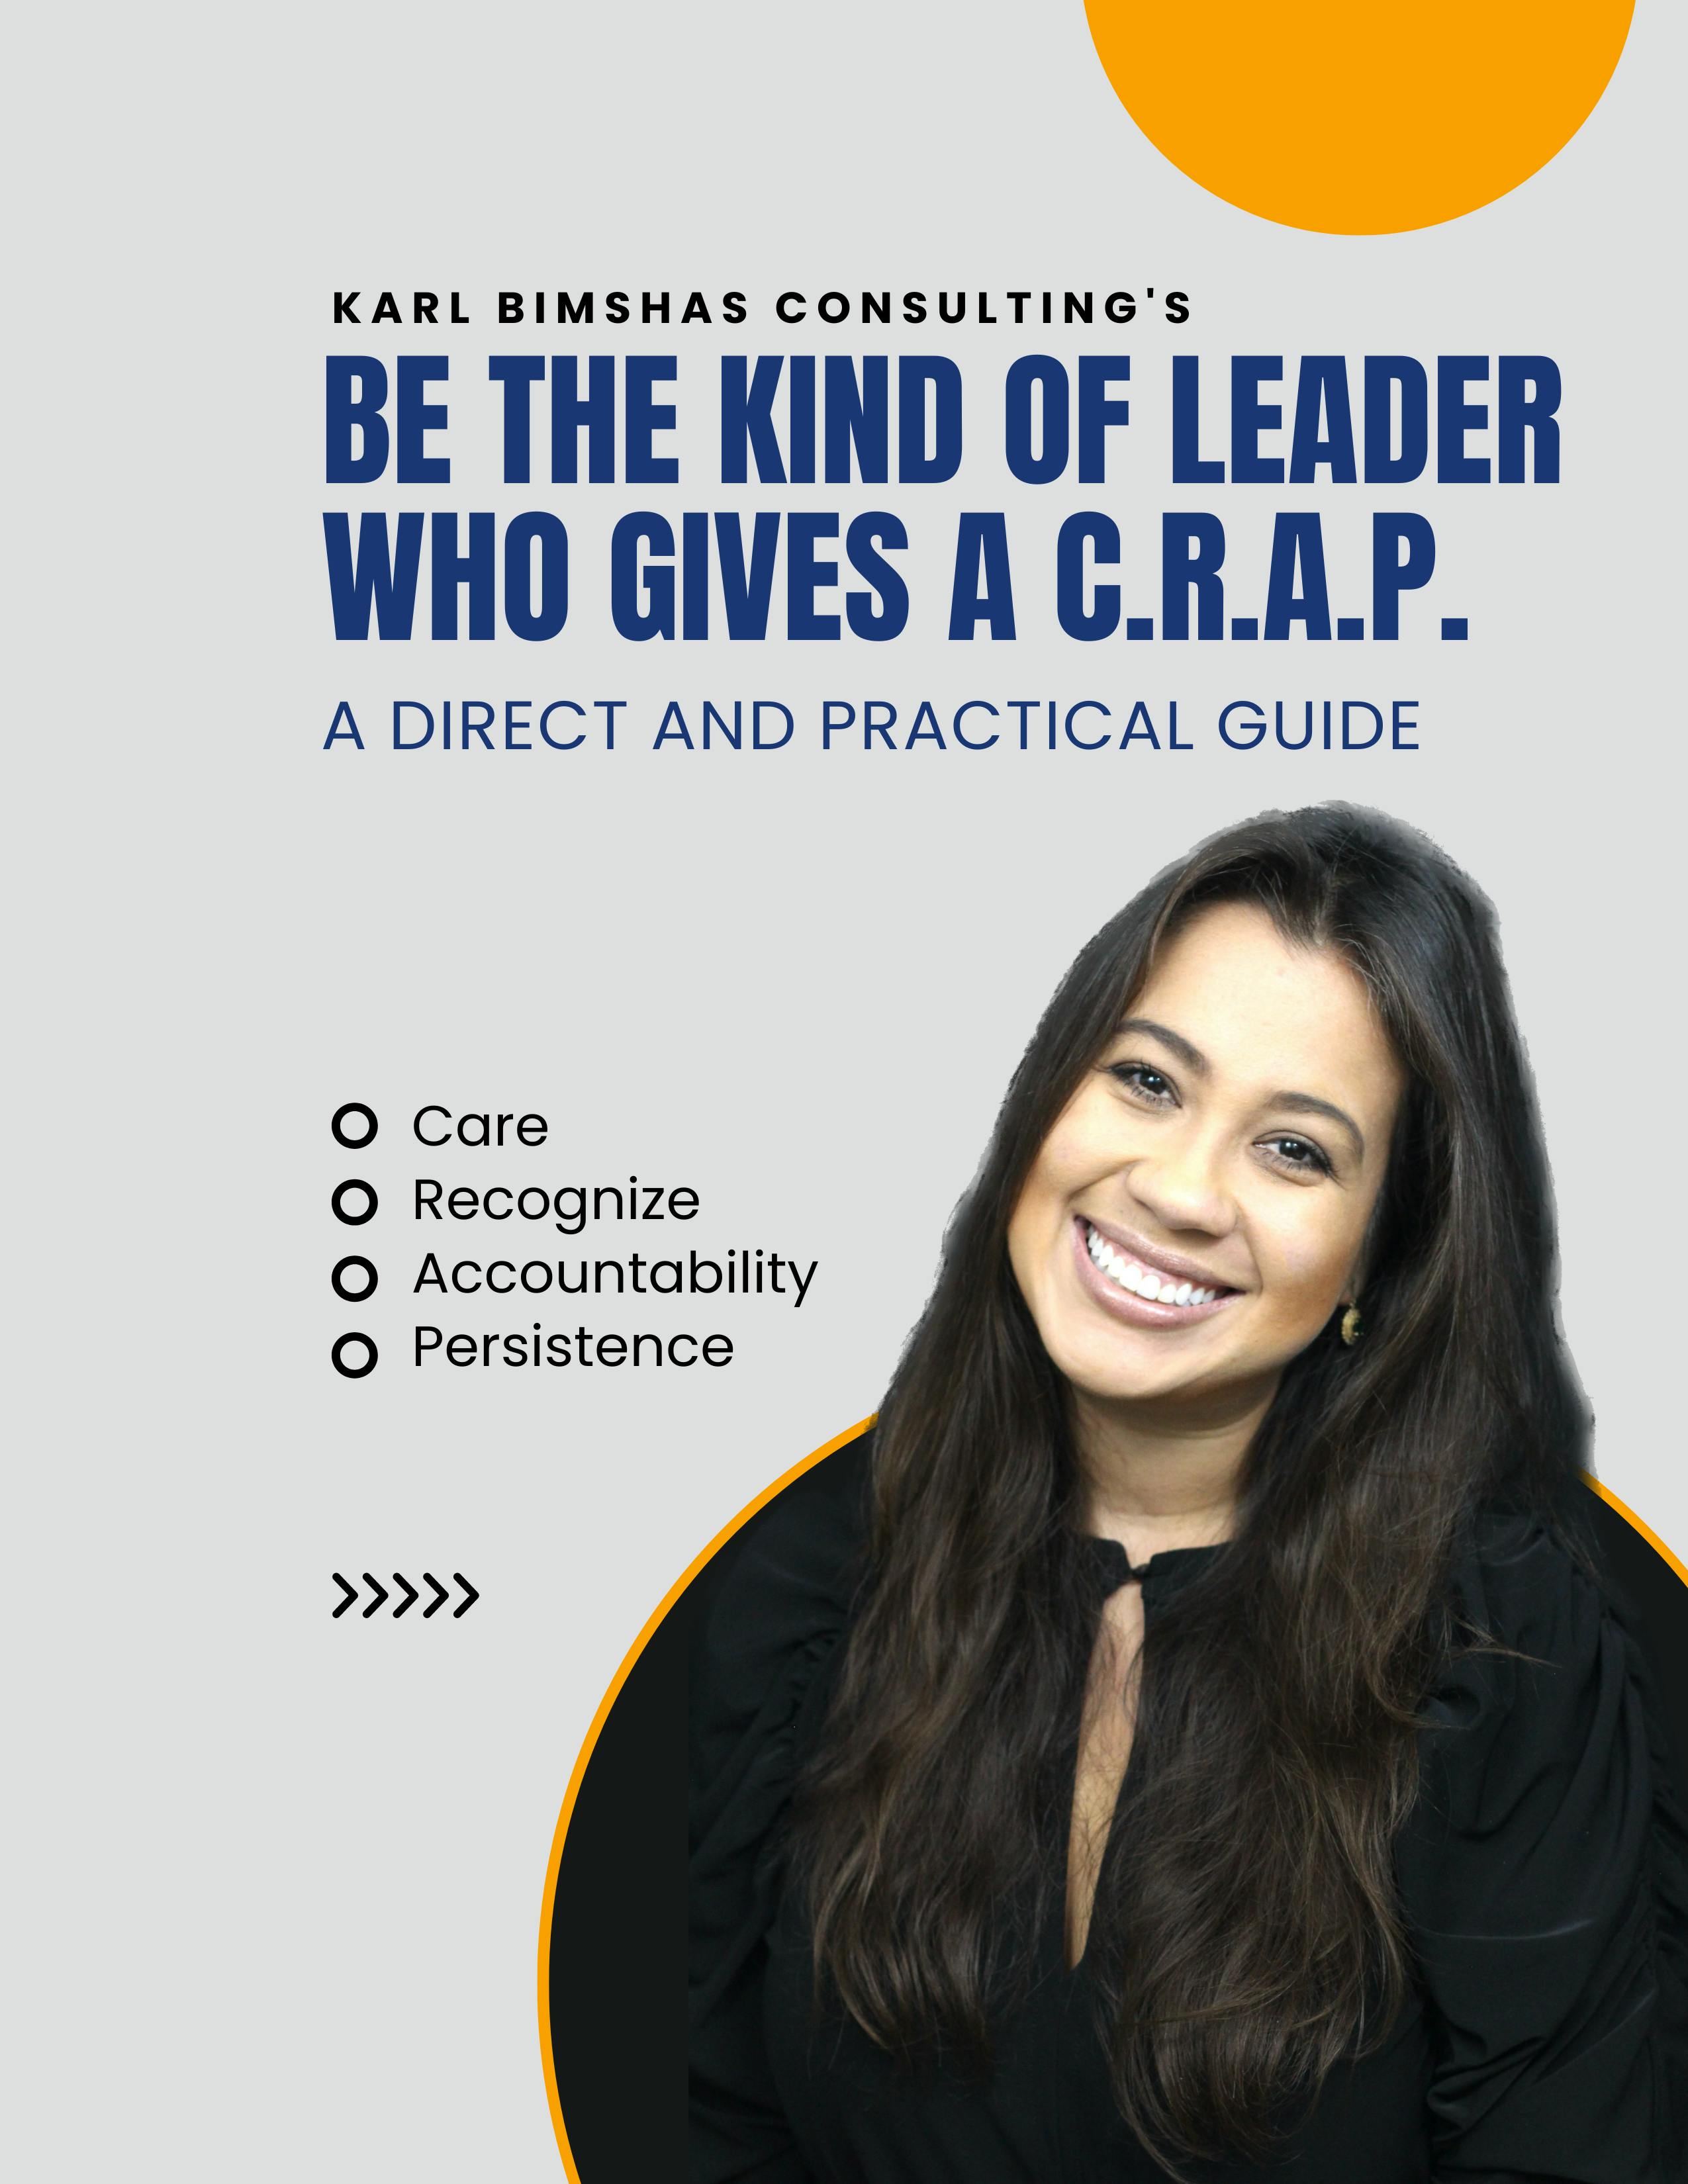 BE THE KIND OF LEADER WHO GIVES A C.R.A.P.